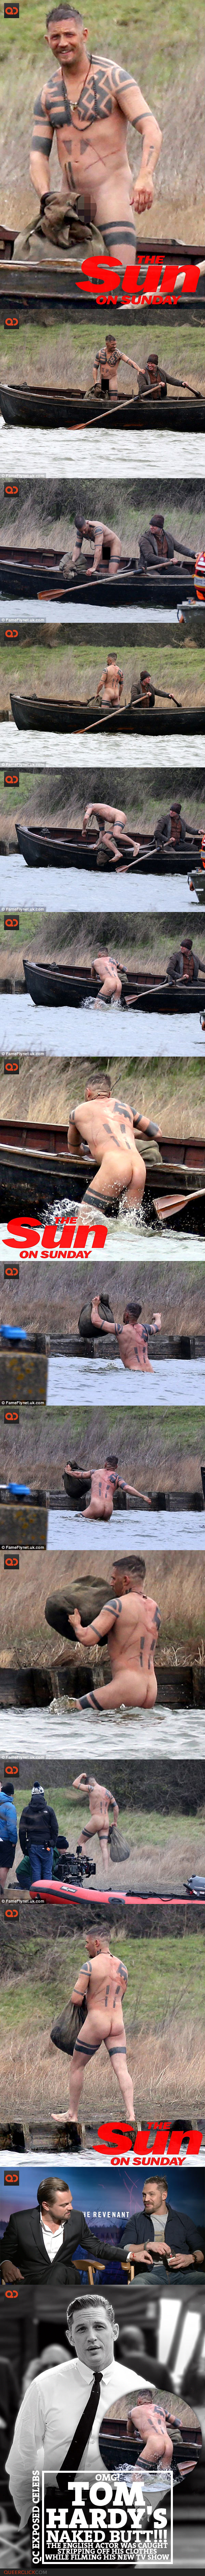 OMG! It's Tom Hardys' Naked Butt!!! The English Actor Was Caught Stripping Off His Clothes While Filming His New Tv Show